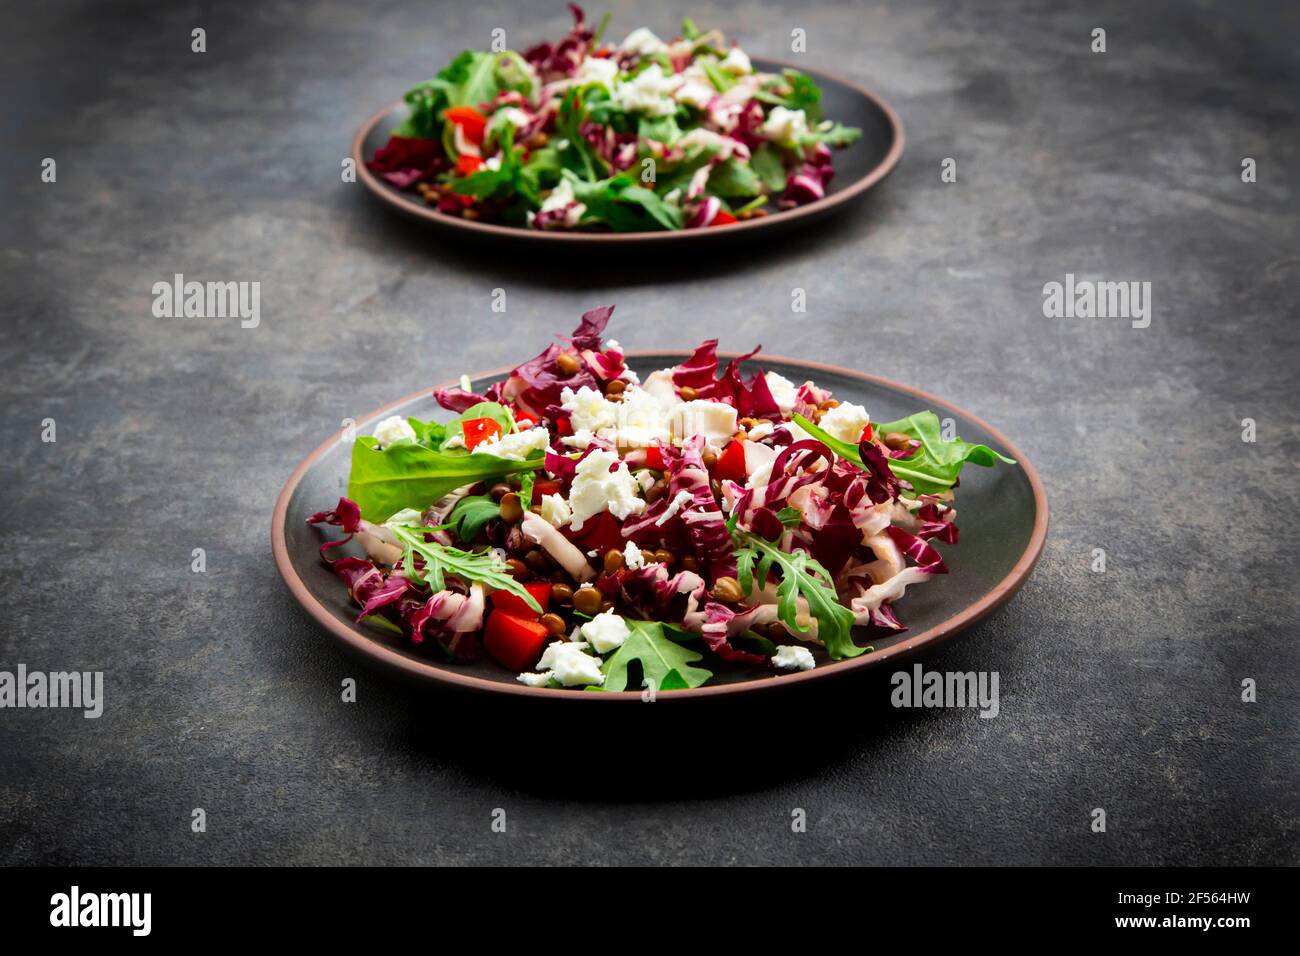 Studio shot of two plates of vegetarian salad with lentils, arugula, feta cheese, radicchio and bell pepper Stock Photo